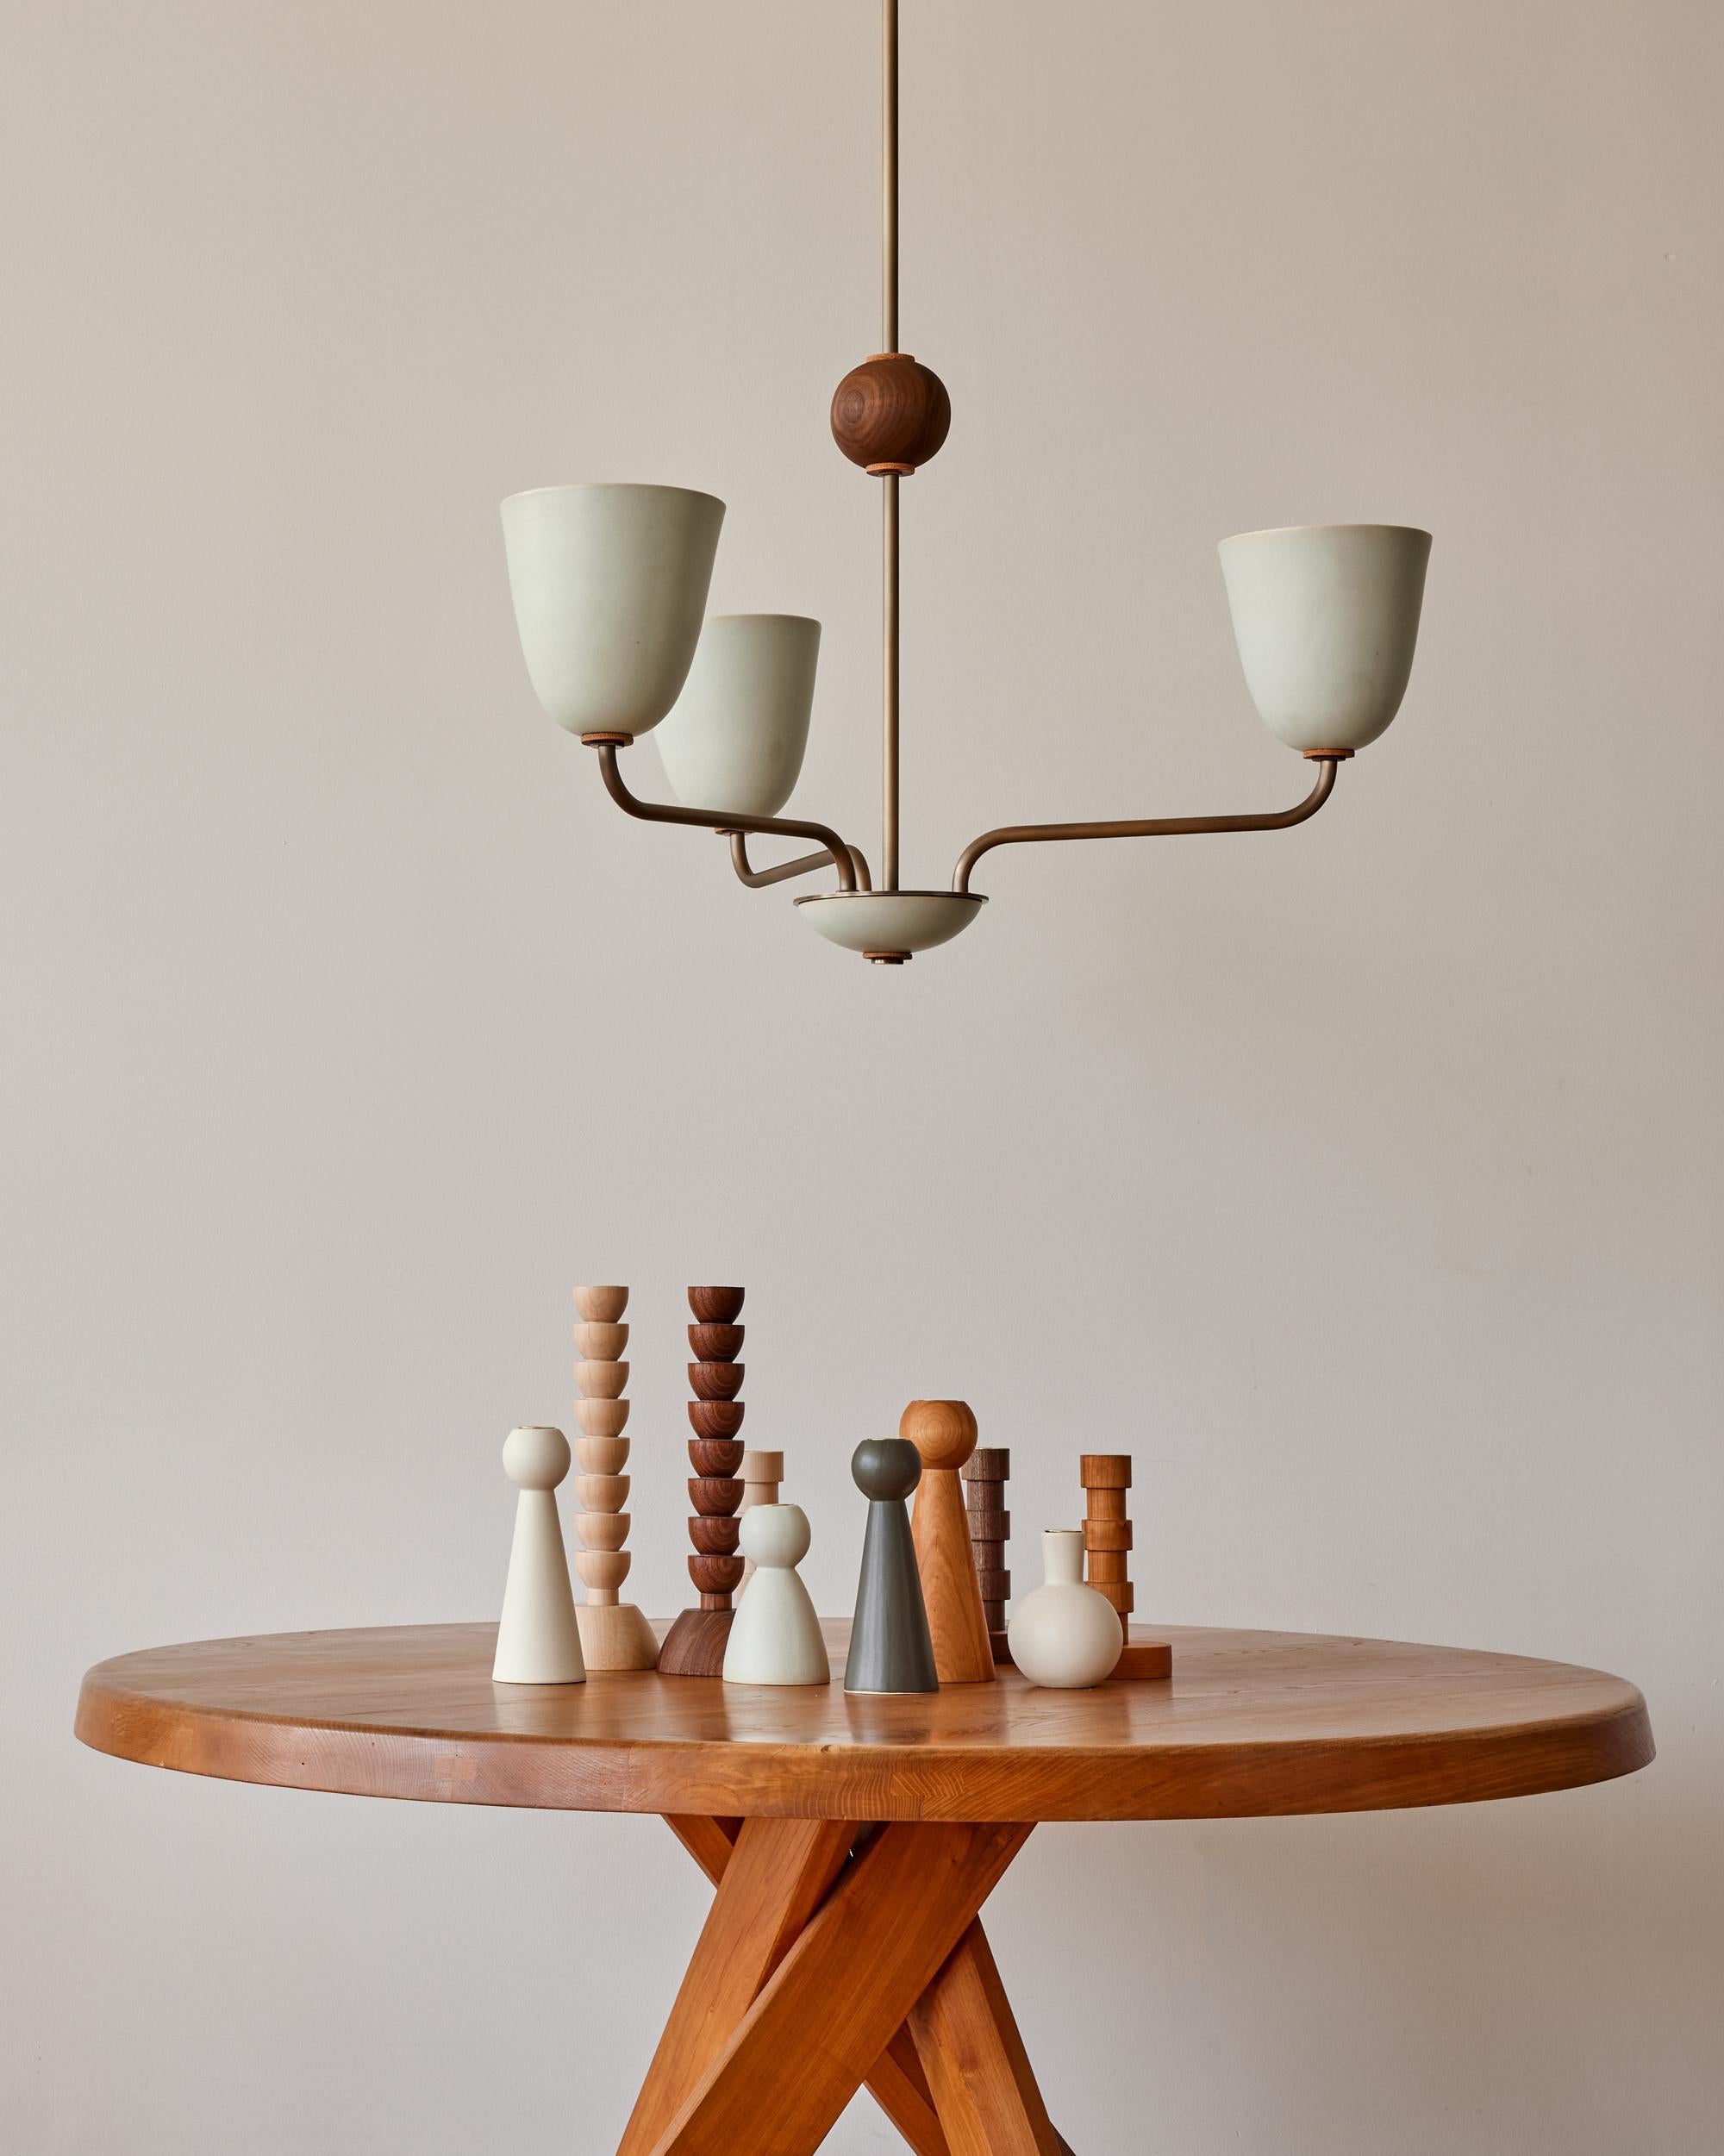 Three antique brass patina arms curve up from a ceramic cluster dish to three tall stoneware ceramic shades in a matte glaze with a tinge of blue. With a fixed black walnut orb and tan harness leather accents, this graceful chandelier has the